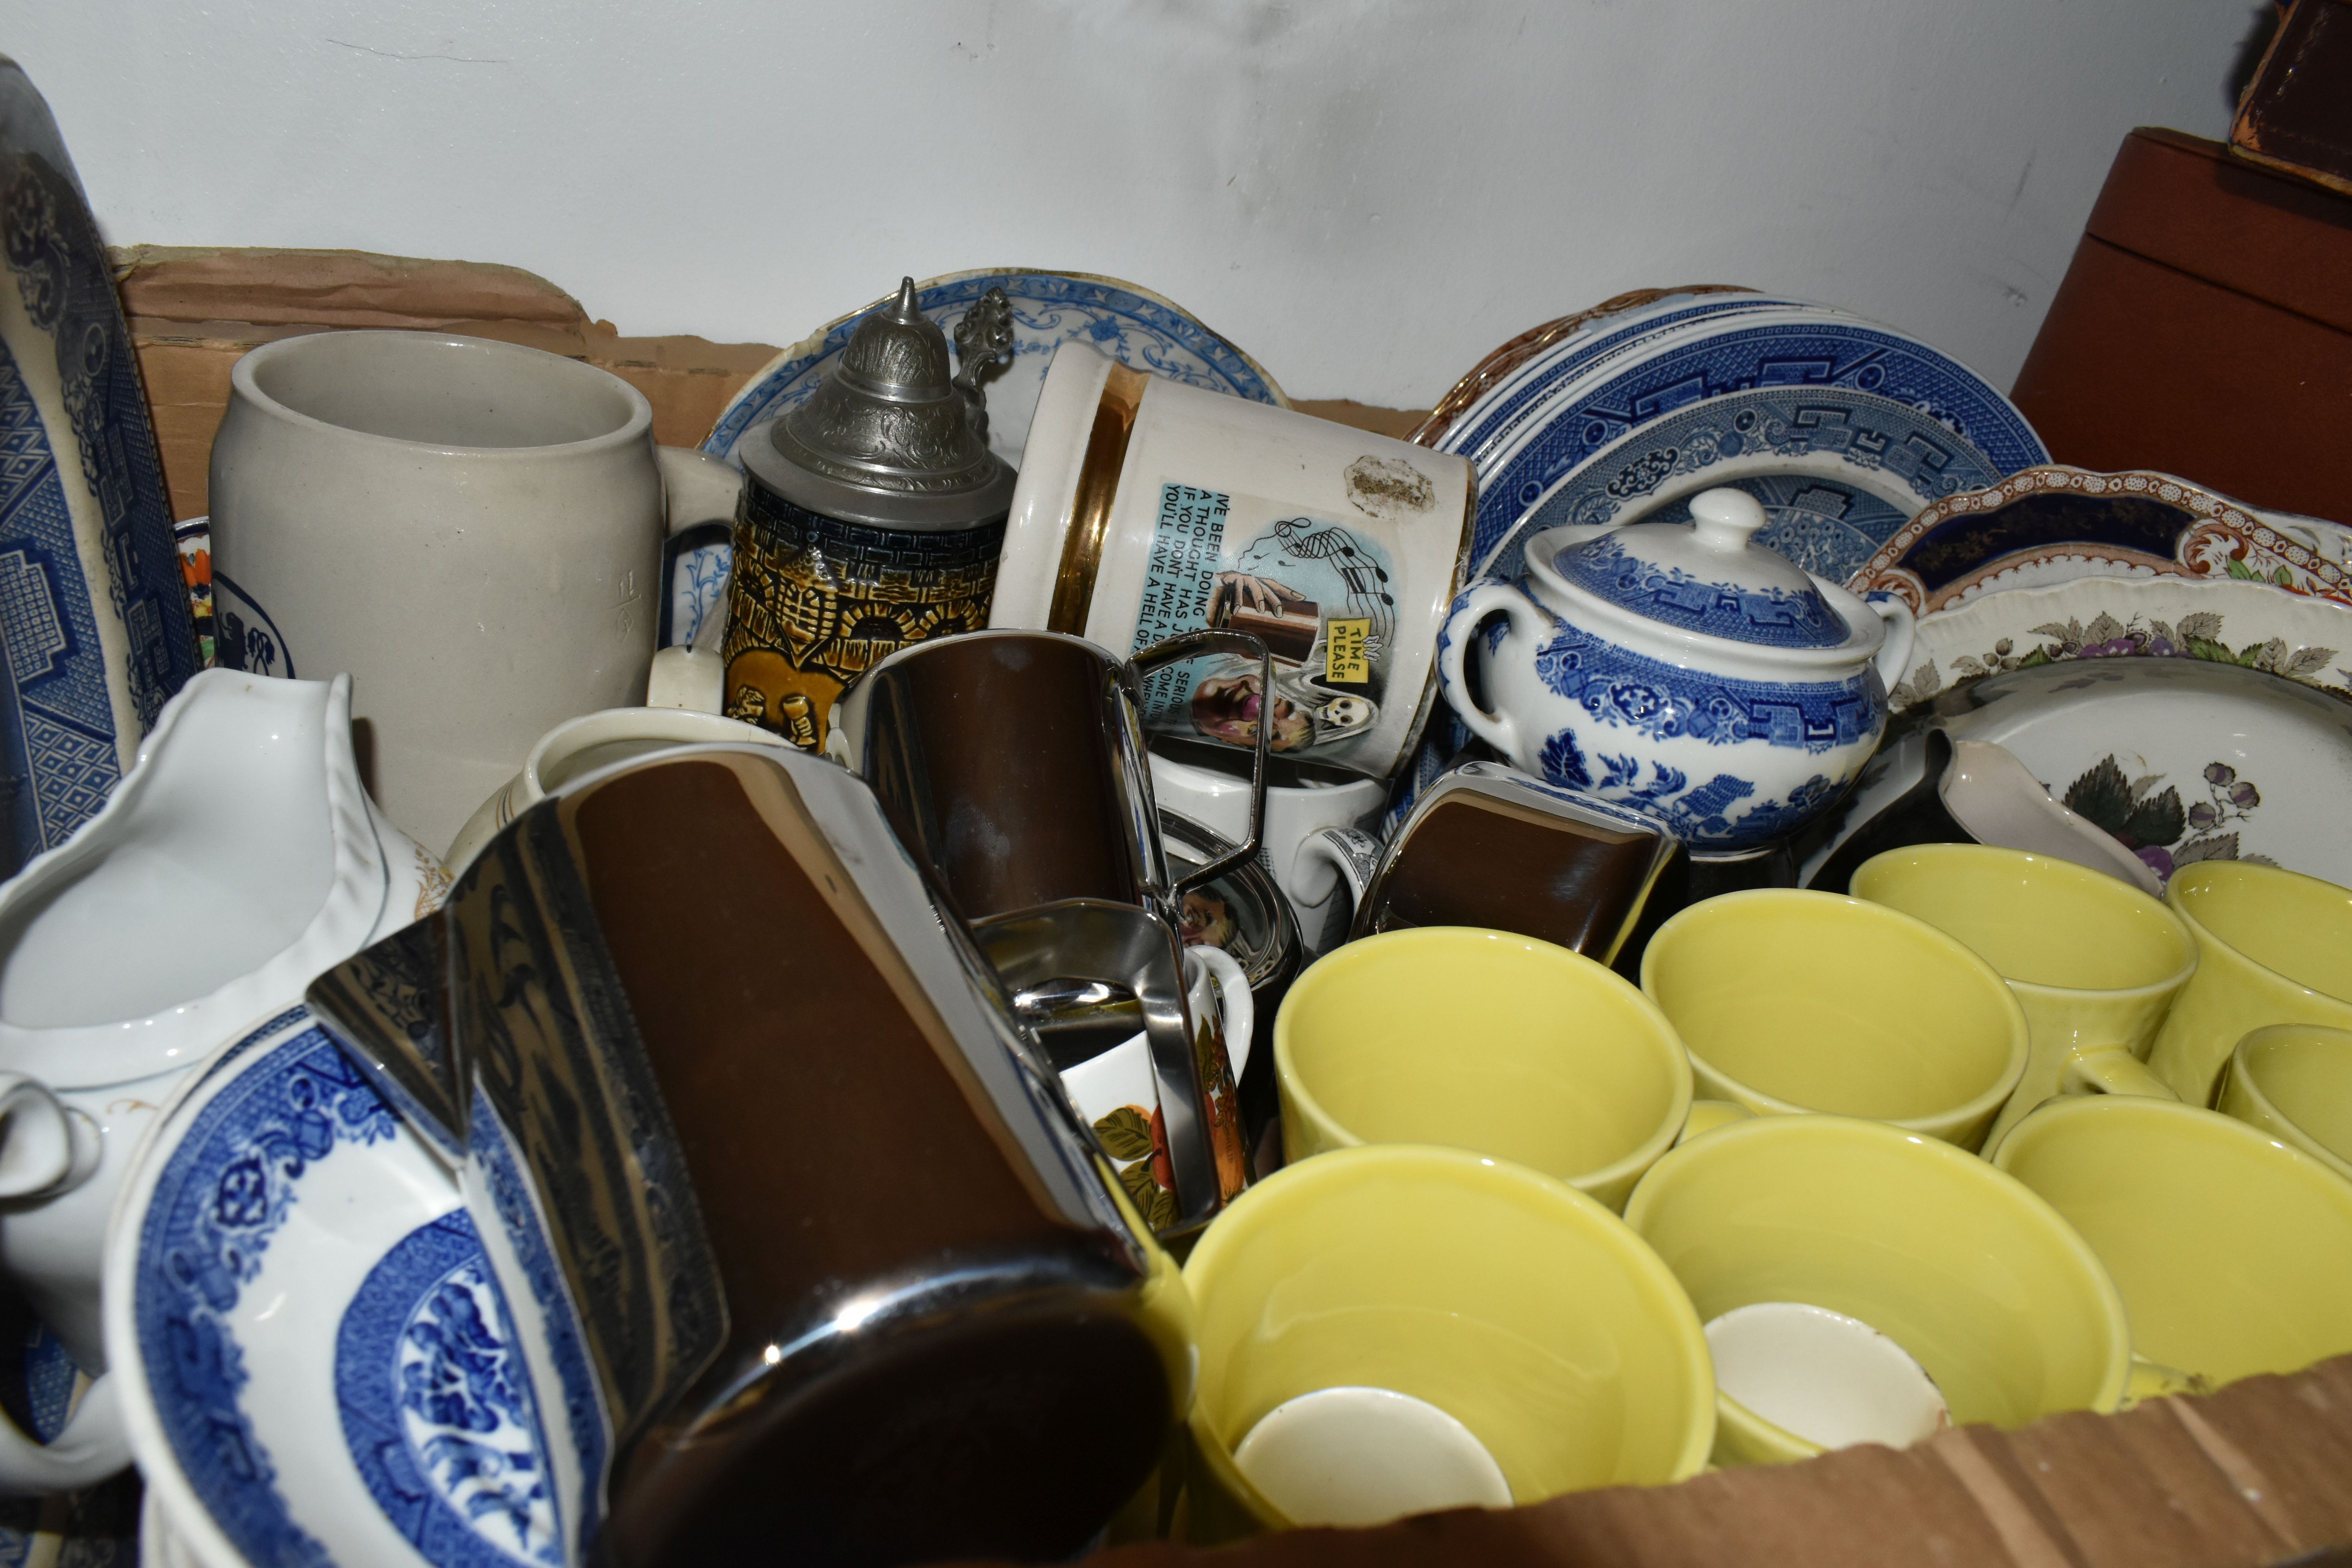 SIX BOXES OF GLASSWARE AND TABLEWARE to include a large variety of 'Royal Doulton' kitchenware in - Image 5 of 7